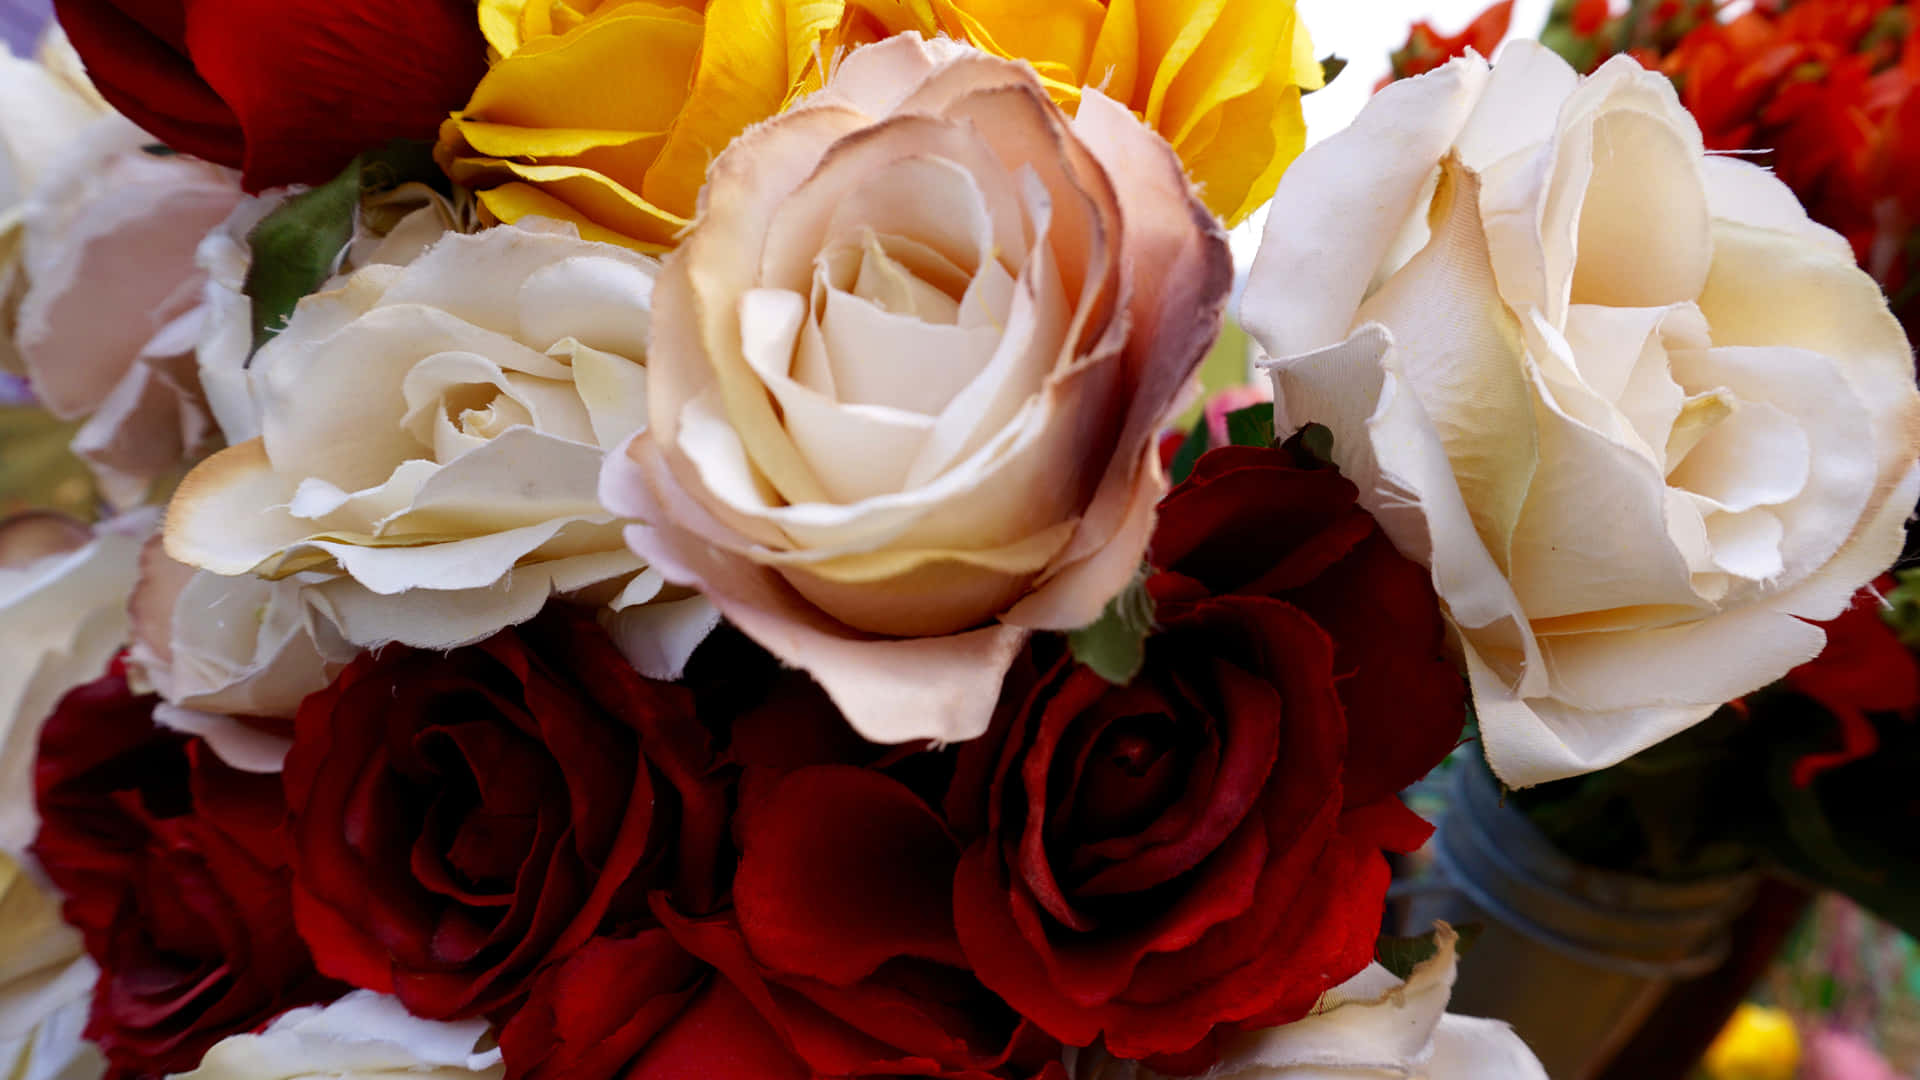 Red And White Roses In A Flower Arrangement Wallpaper